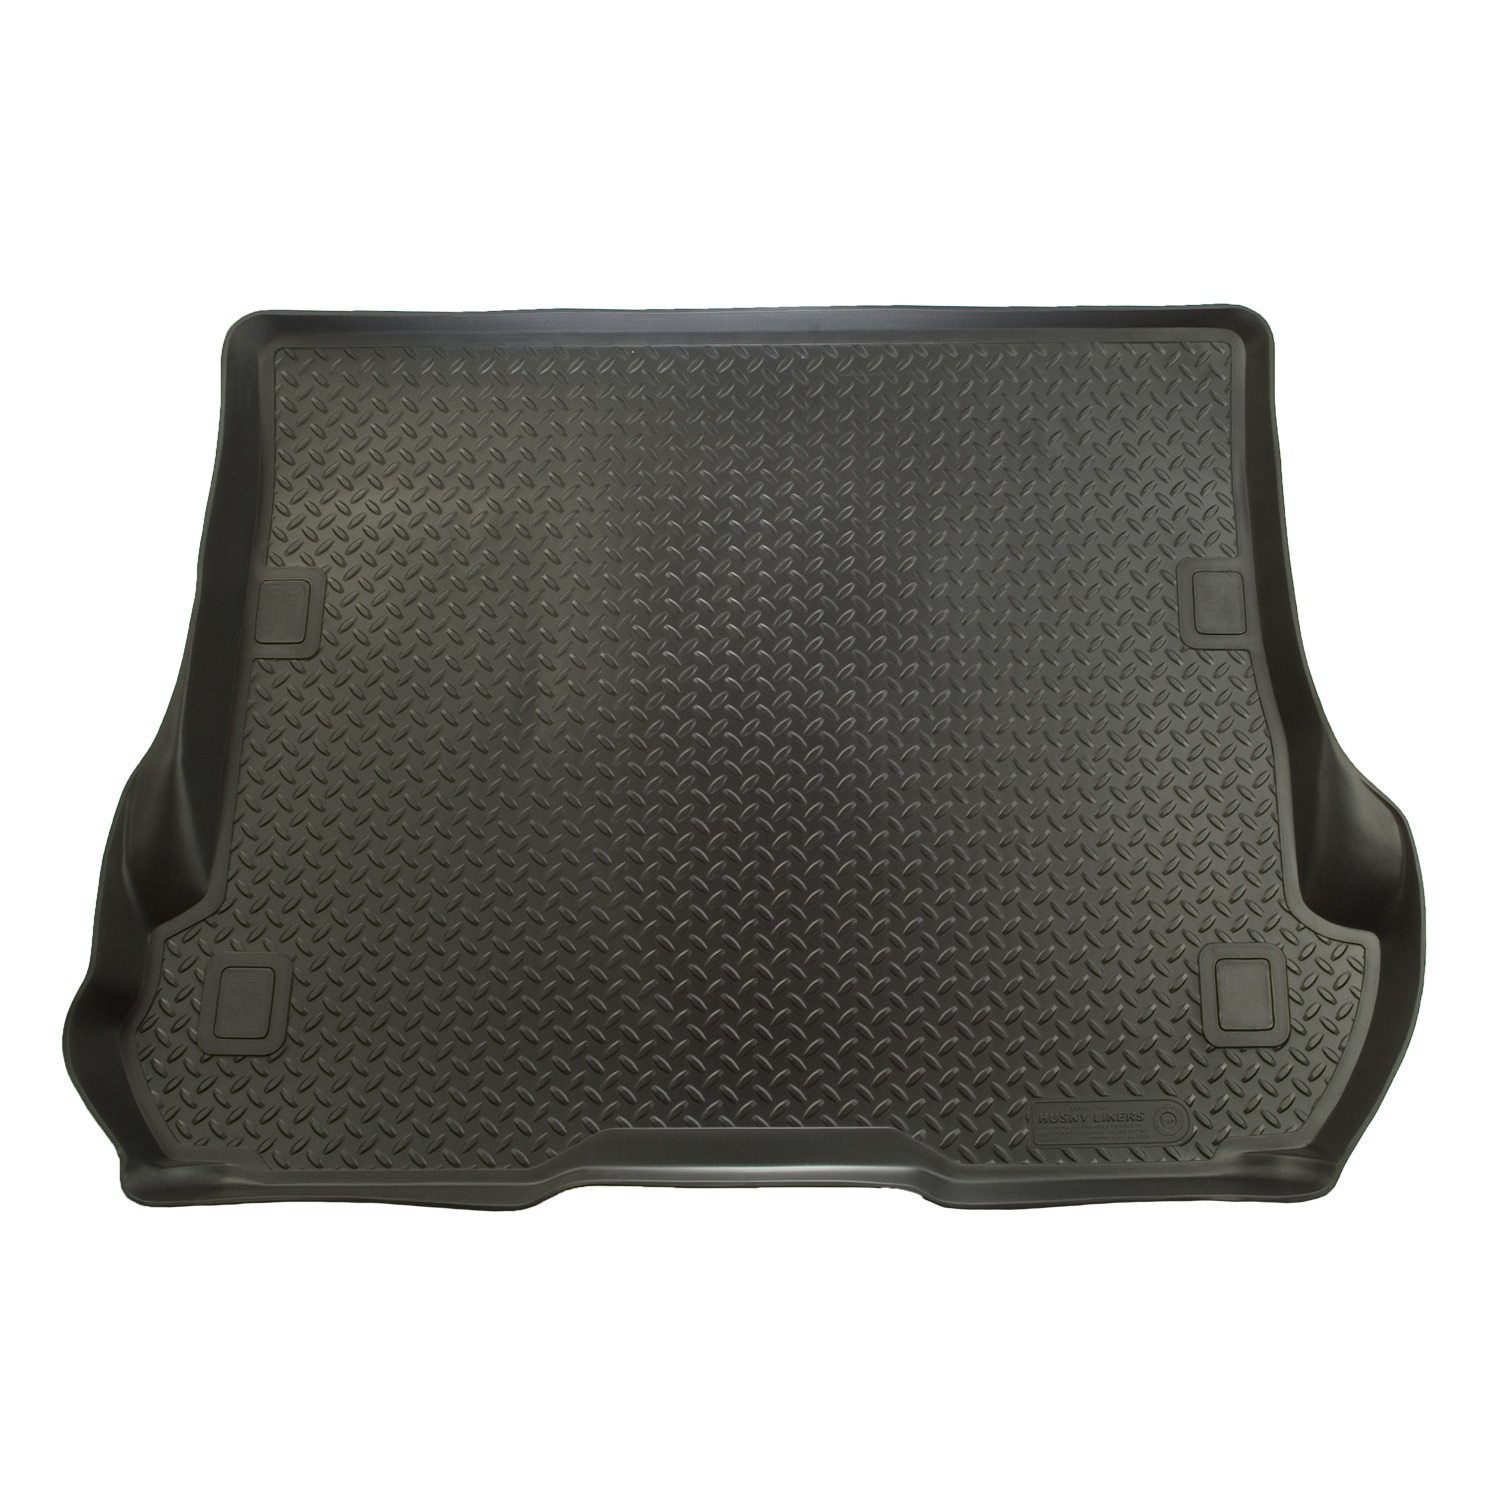 Husky Liners Husky Liners 26601 Classic Style; Cargo Liner Fits 04-14 Armada Pathfinder QX56